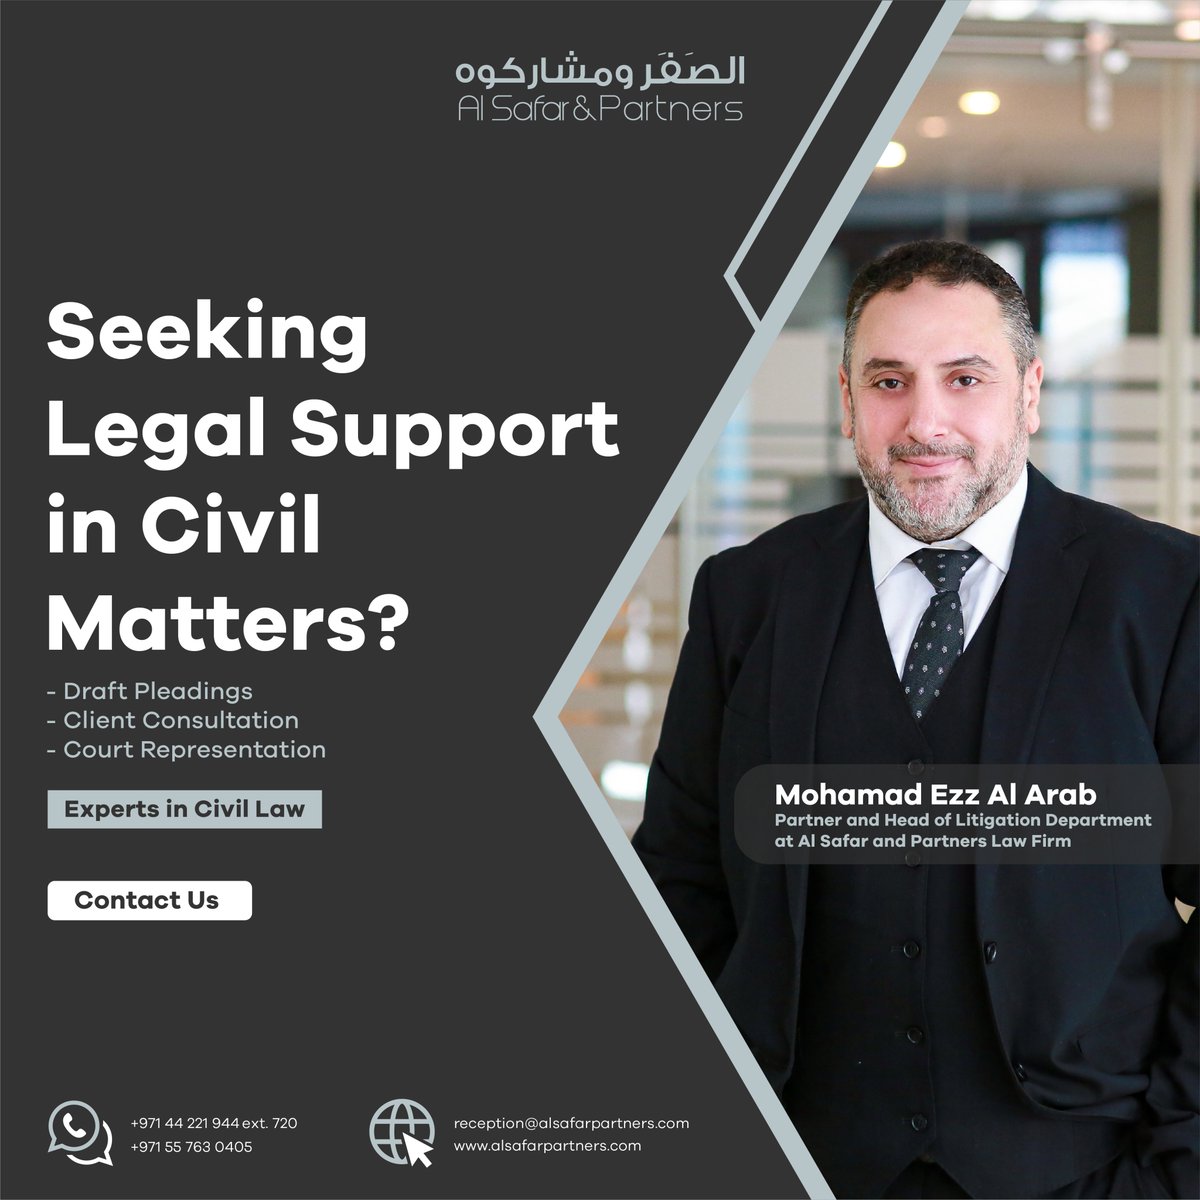 Get expert advice in your civil matters by reaching out to Al Safar and Partners Law Firm at +97144221944 ext. 720 / +971 55 763 0405 or by email at reception@alsafarpartners.com.

#civillaw #civillawyer #litigation #uaelitigationlaw #litigationlawyer #alsafarpartners #uae